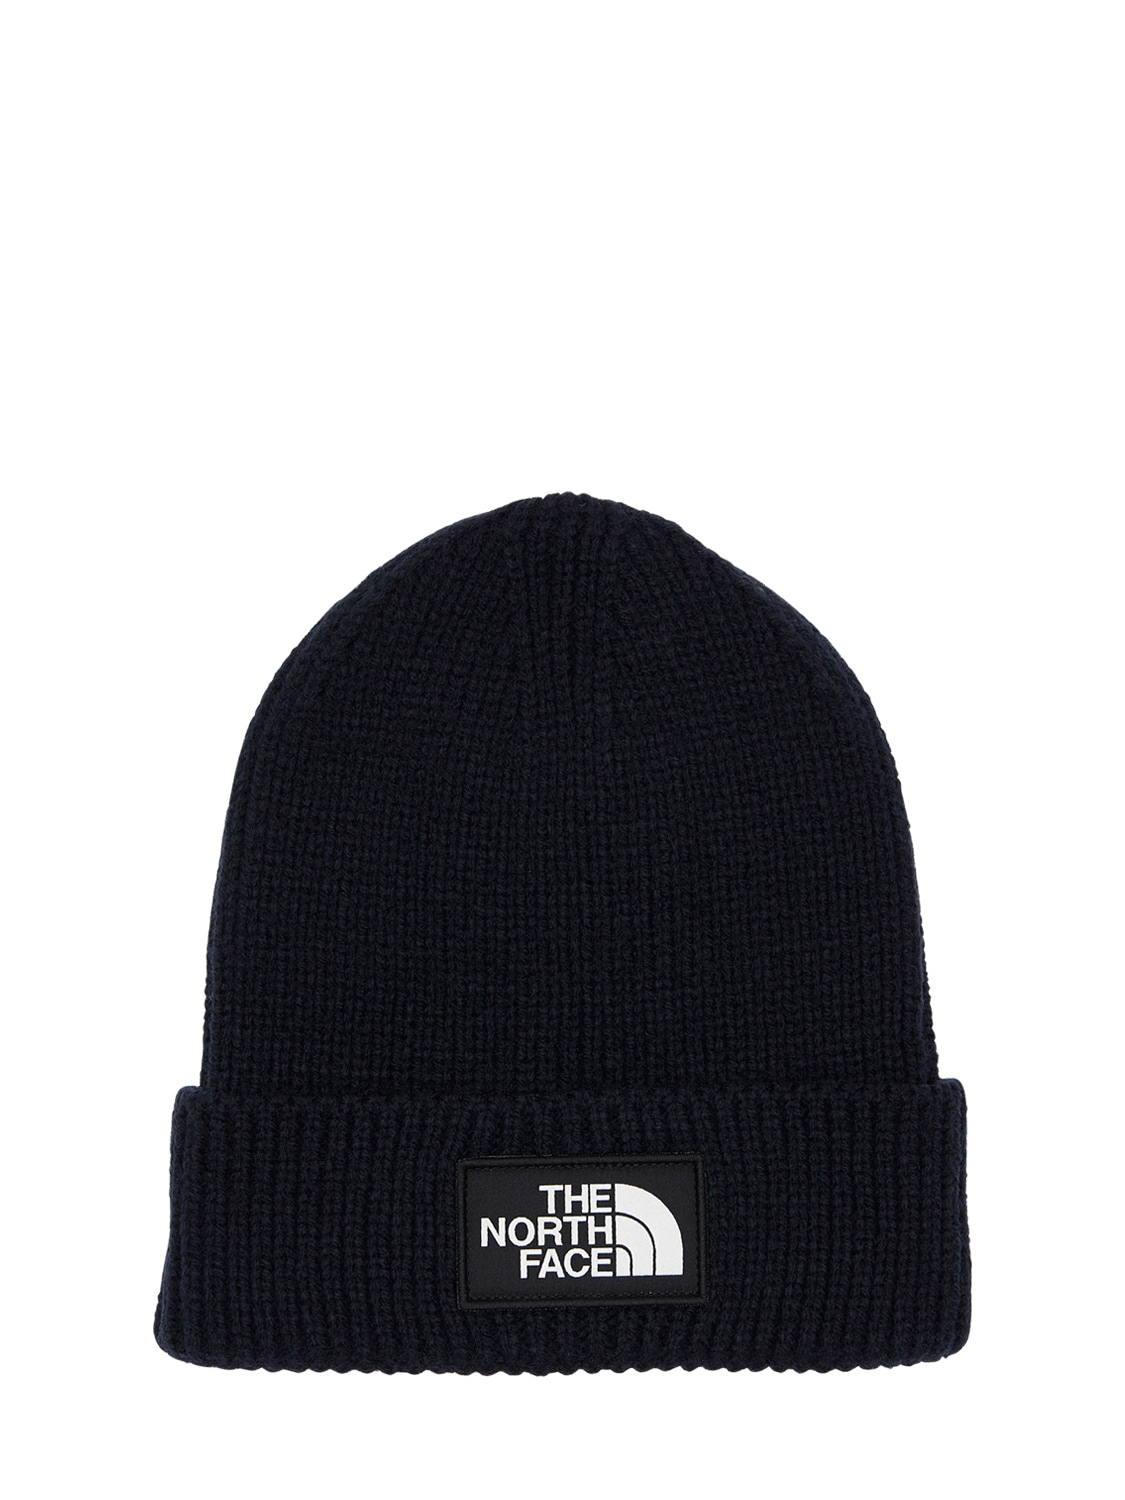 The North Face Logo Box Cuffed Acrylic Blend Beanie In Navy